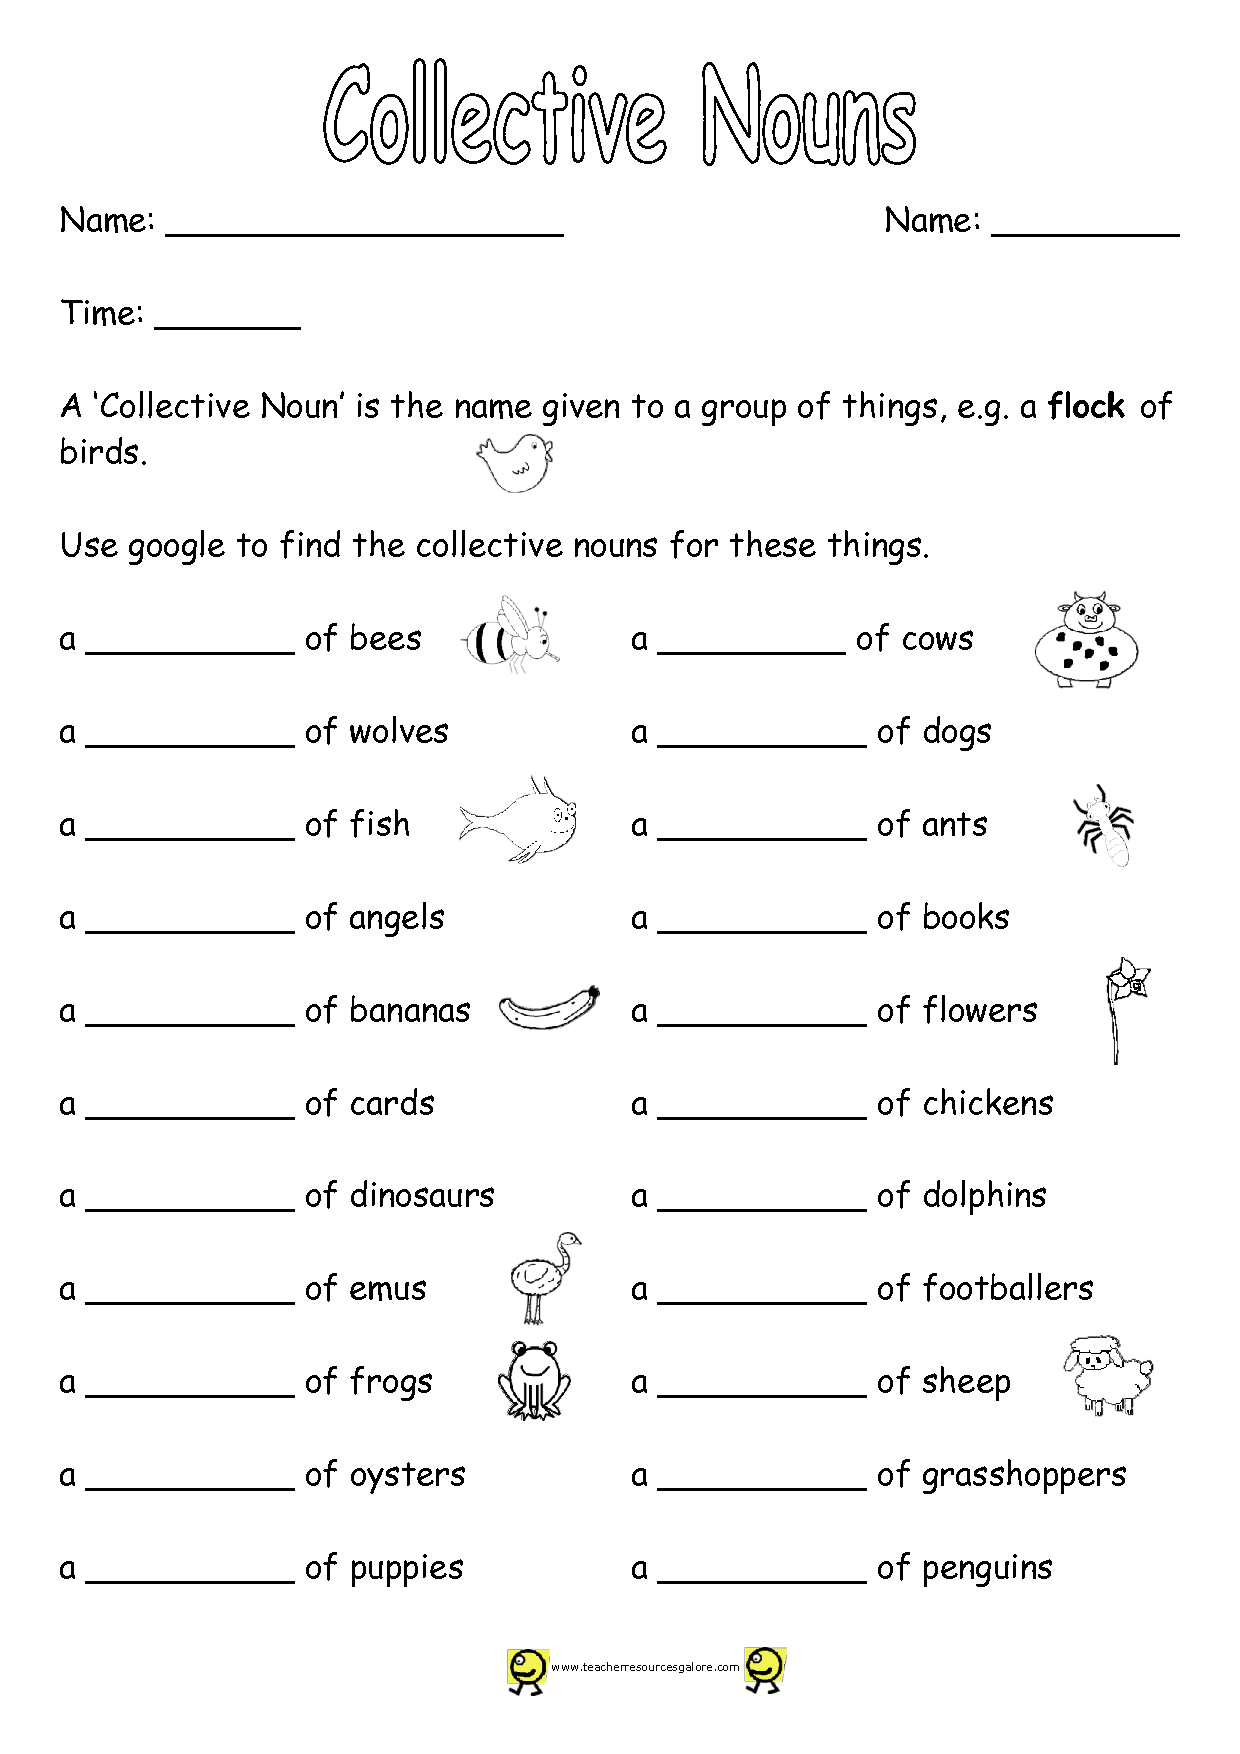 collective-nouns-for-grade-5-collective-nouns-worksheet-5th-grade-worksheets-samples